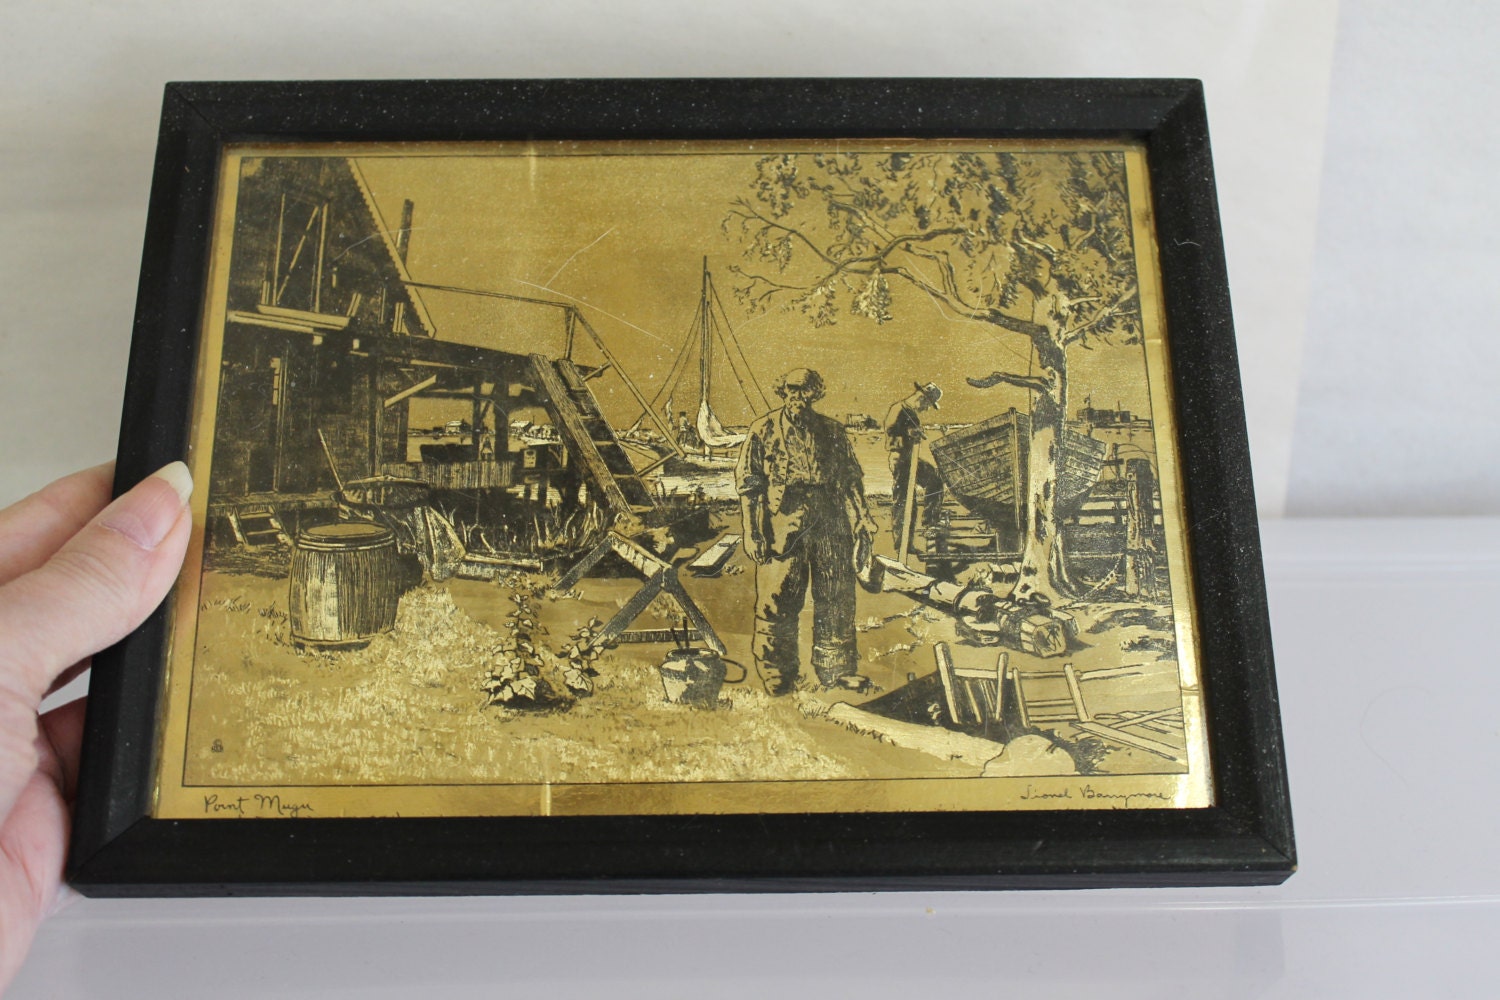 Signed Lionel Barrymore Etchings on Gold Foil Point Mugu is